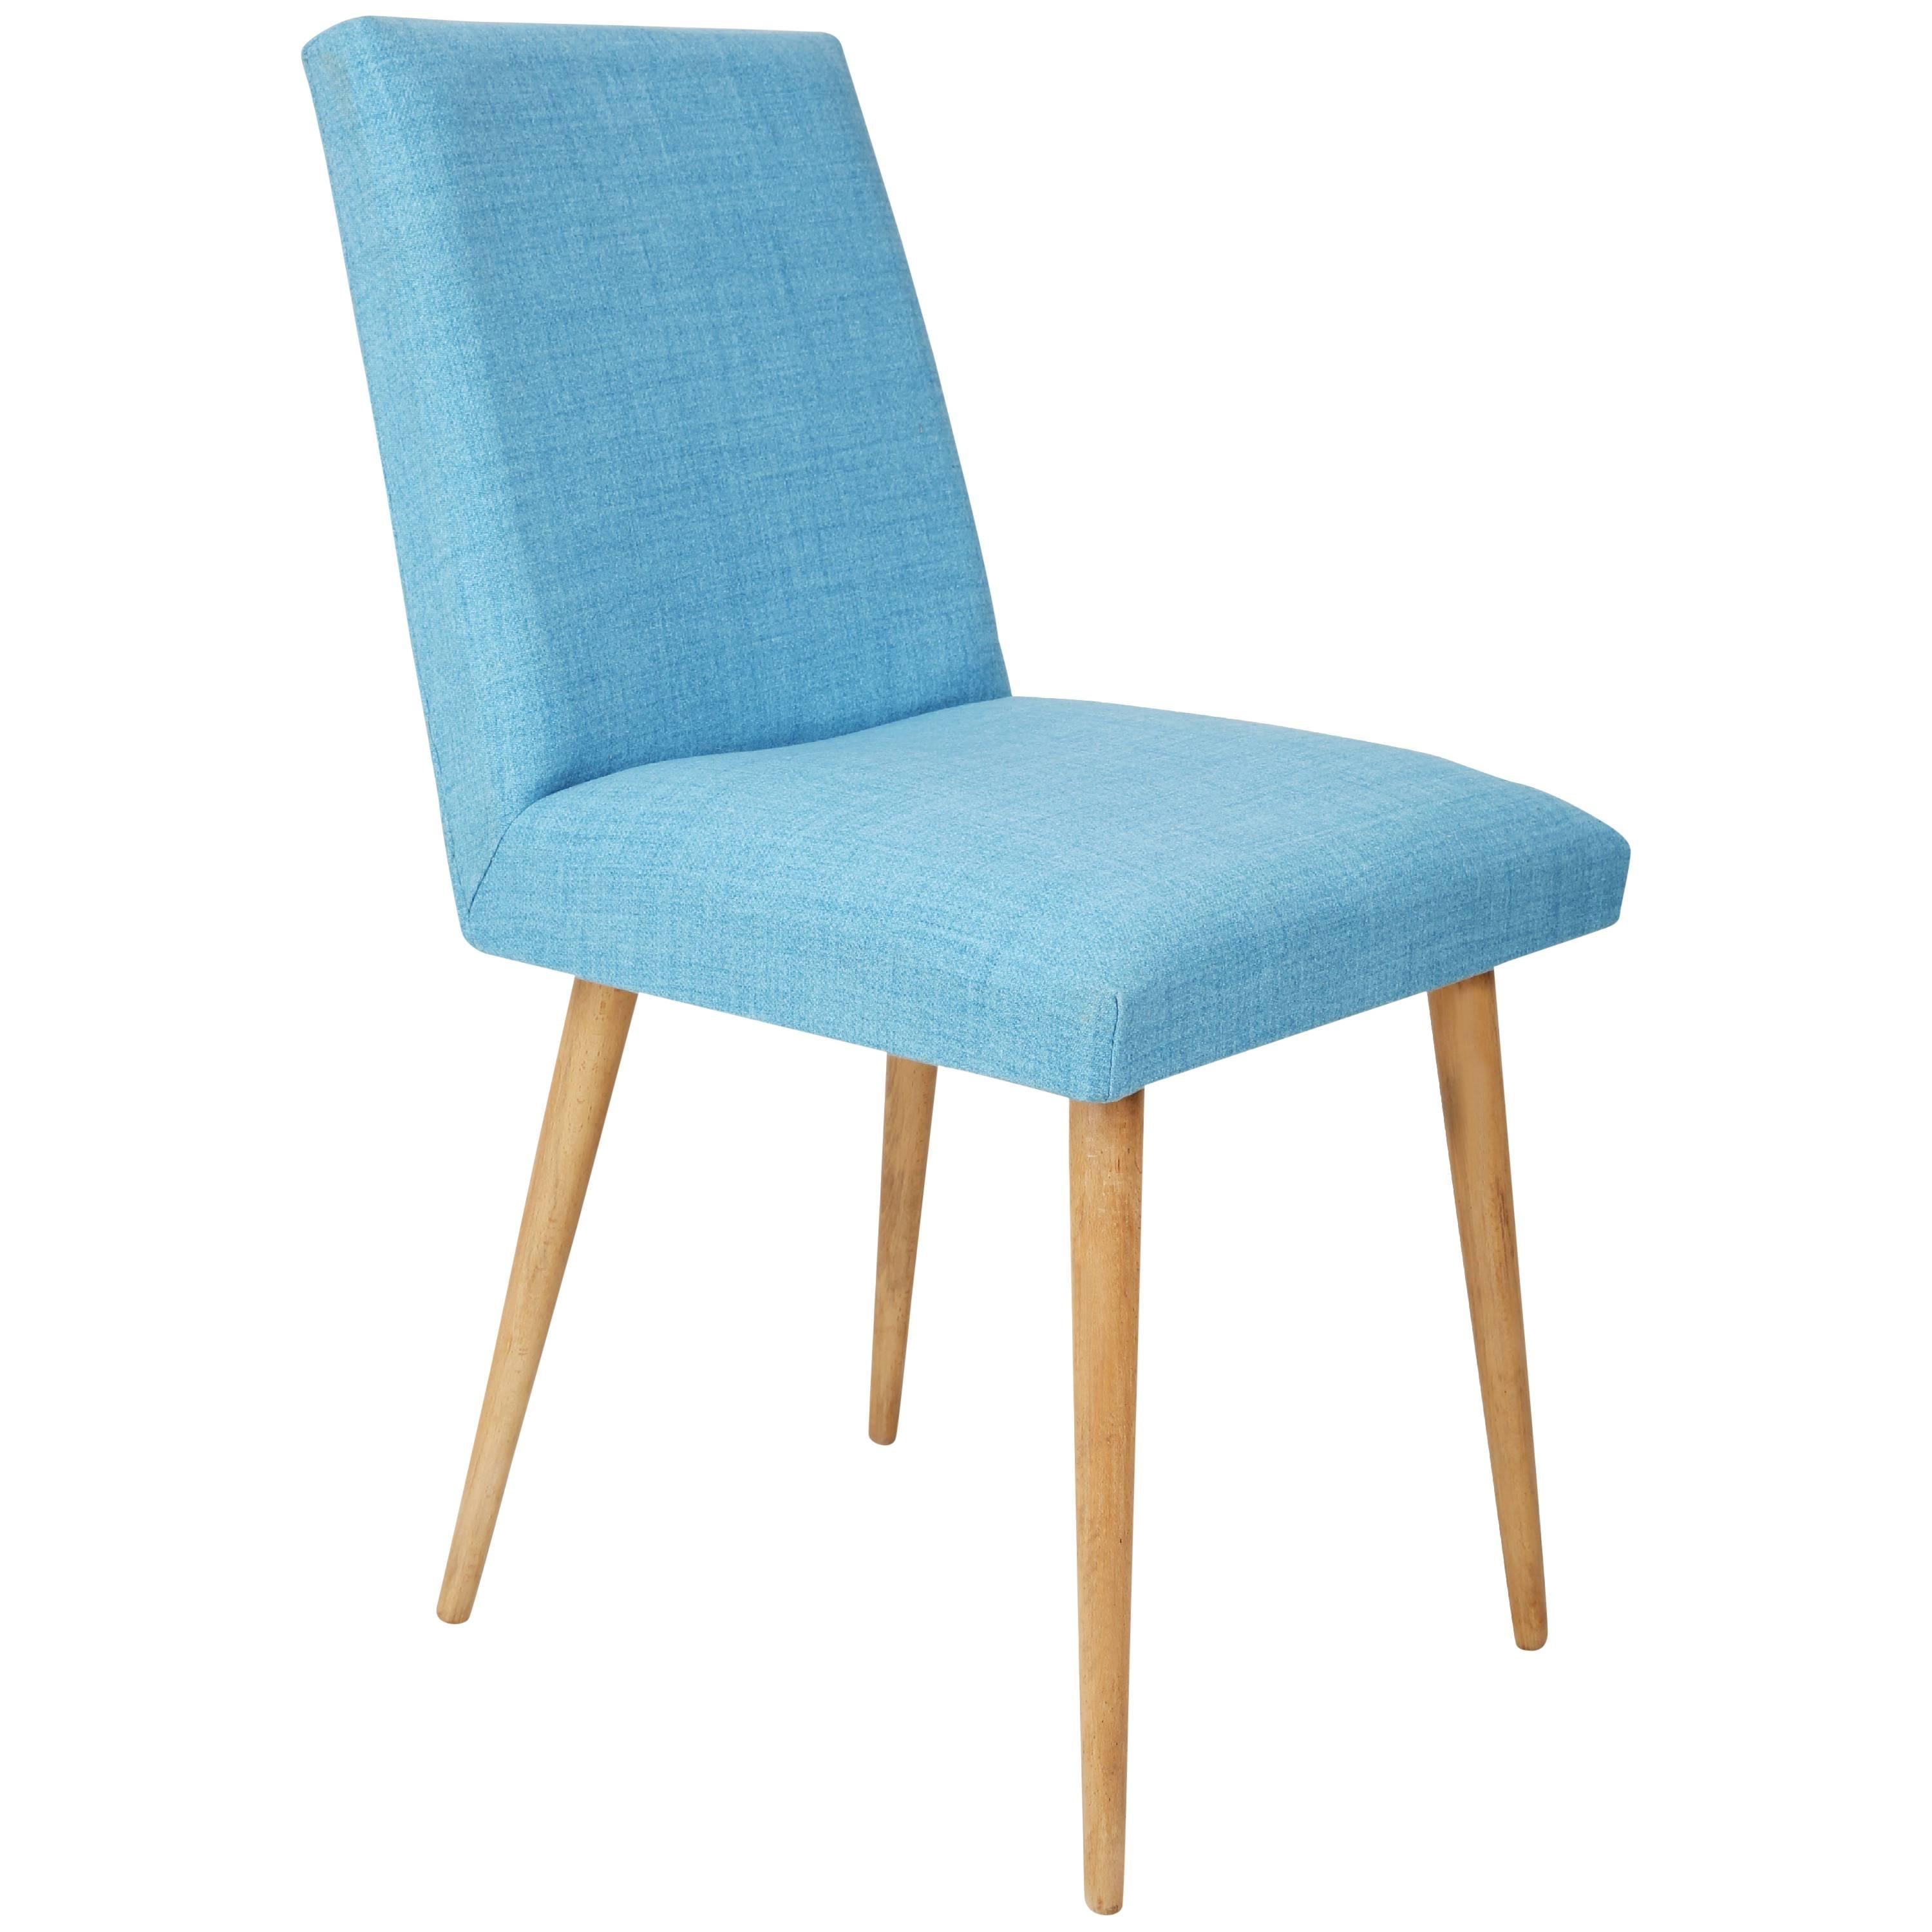 Mid Century Baby Blue Chair with Light Wood Legs, 1960s, Poland For Sale